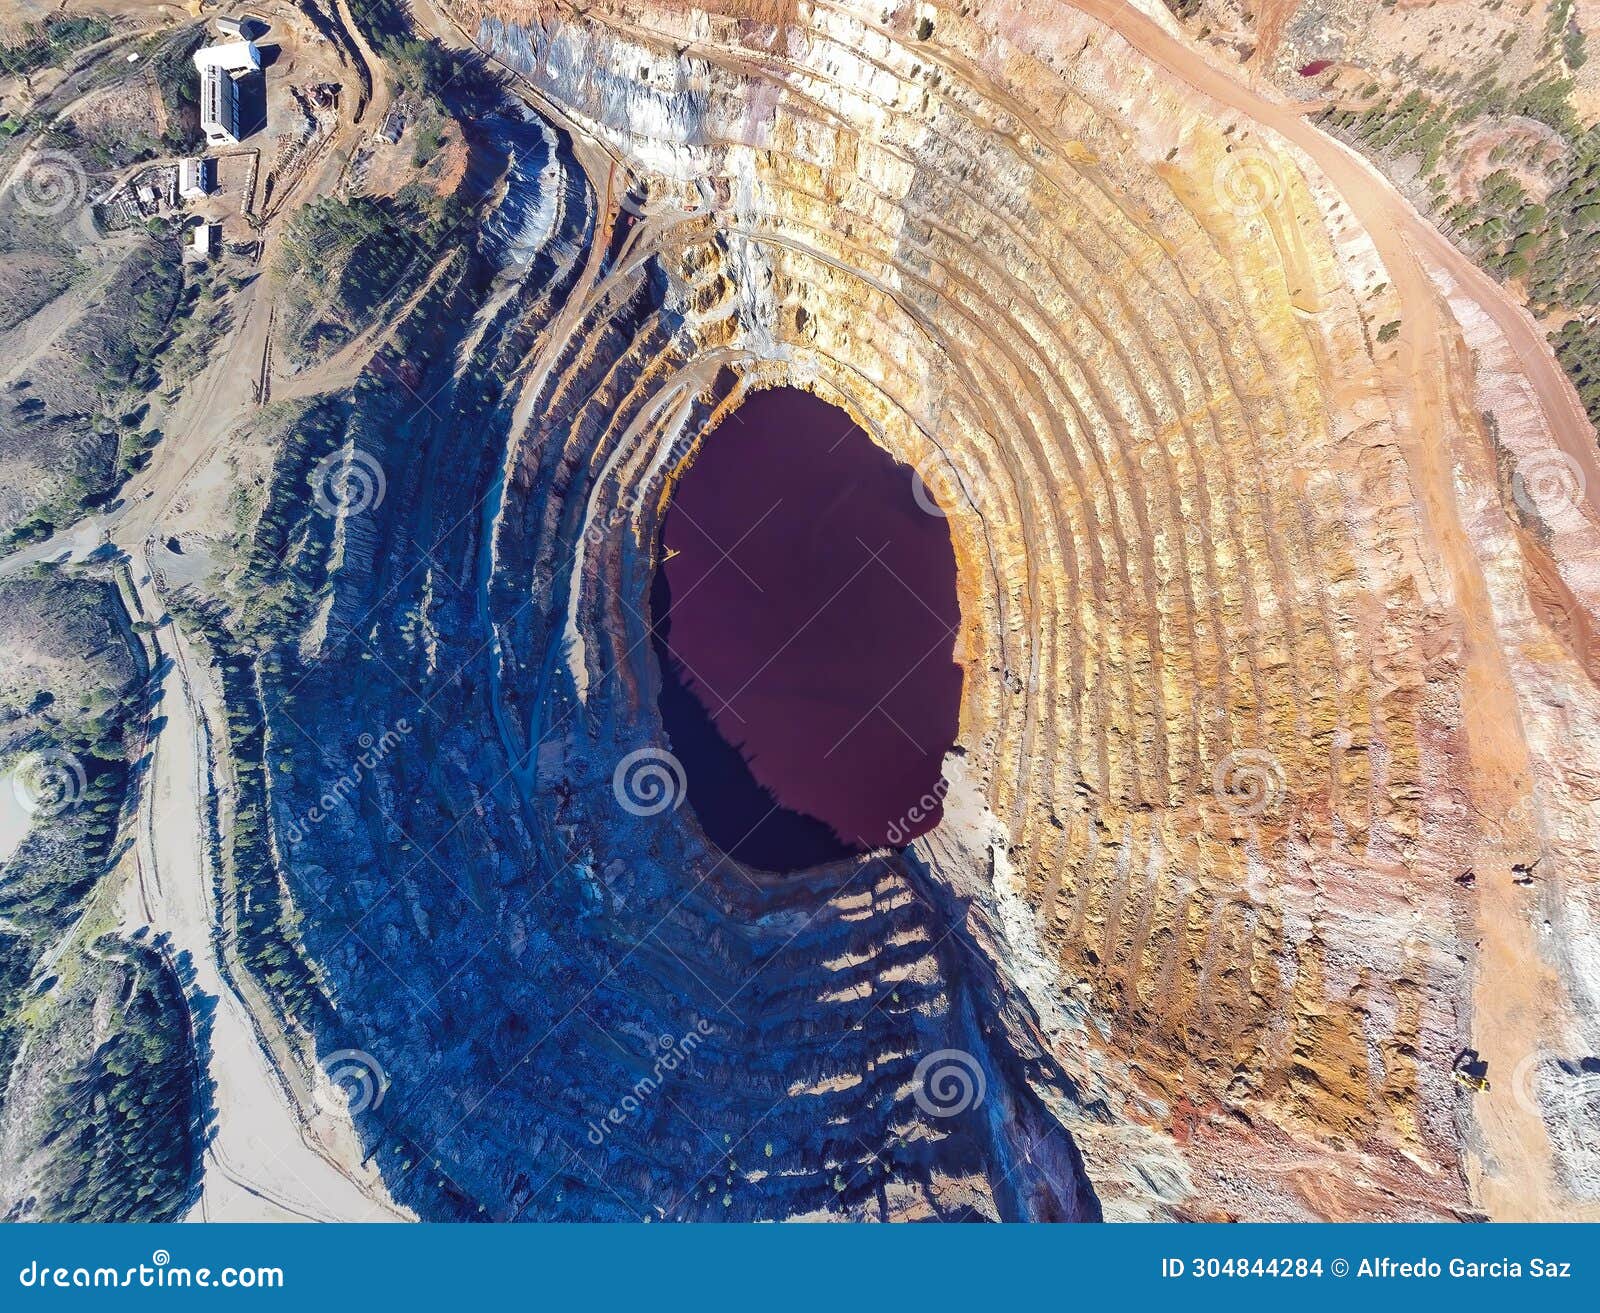 aerial drone view of corta atalaya with mining levels at open mine pit.